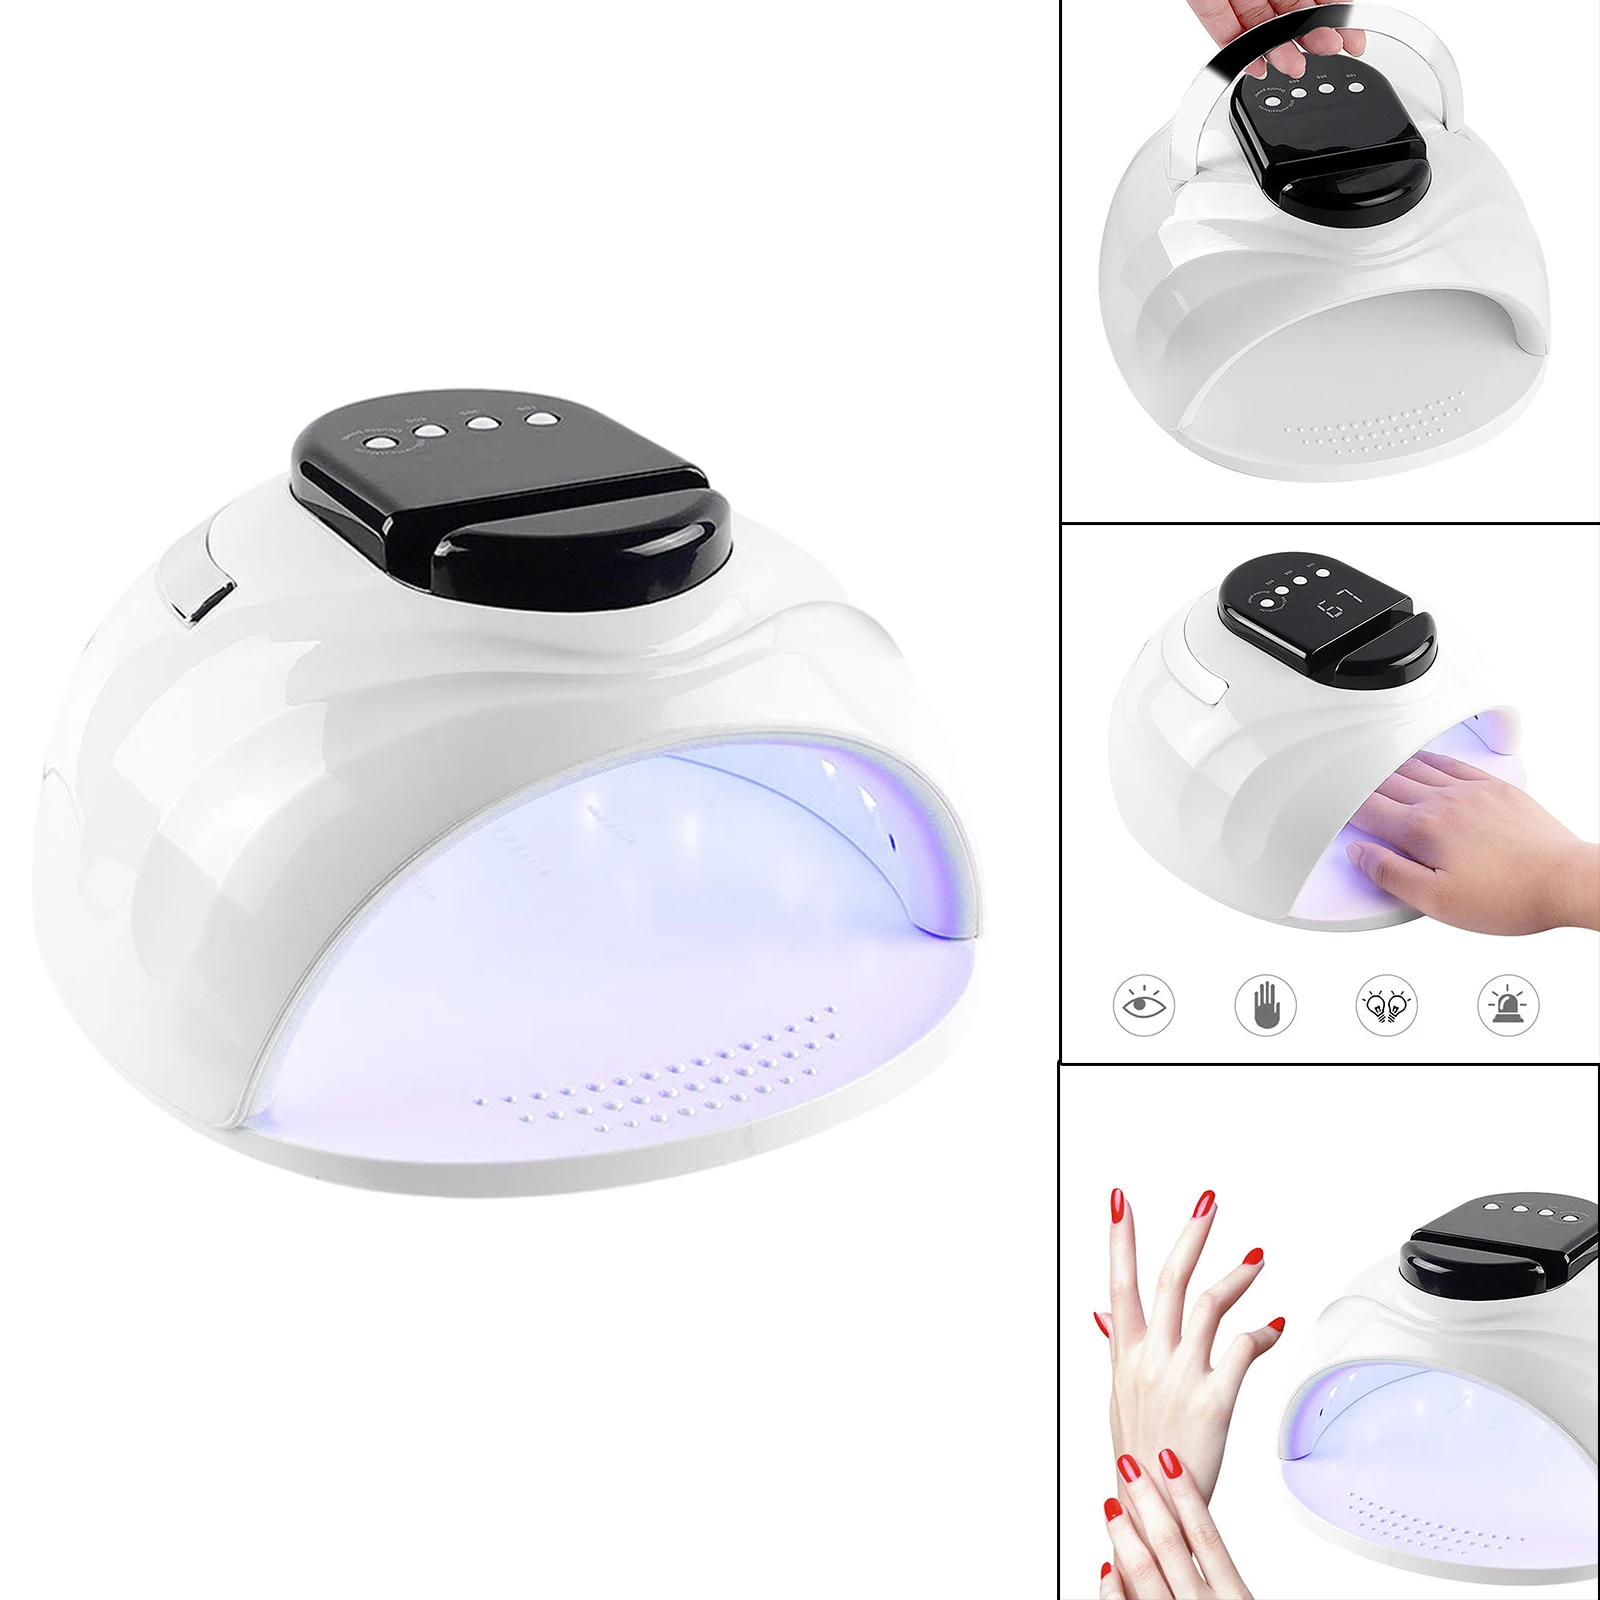 Nail Polish Dryer Nail Polish Curing Lamp LED Display Lamp Gel Acrylic Curing Light for Home Salon Manicure Pedicure